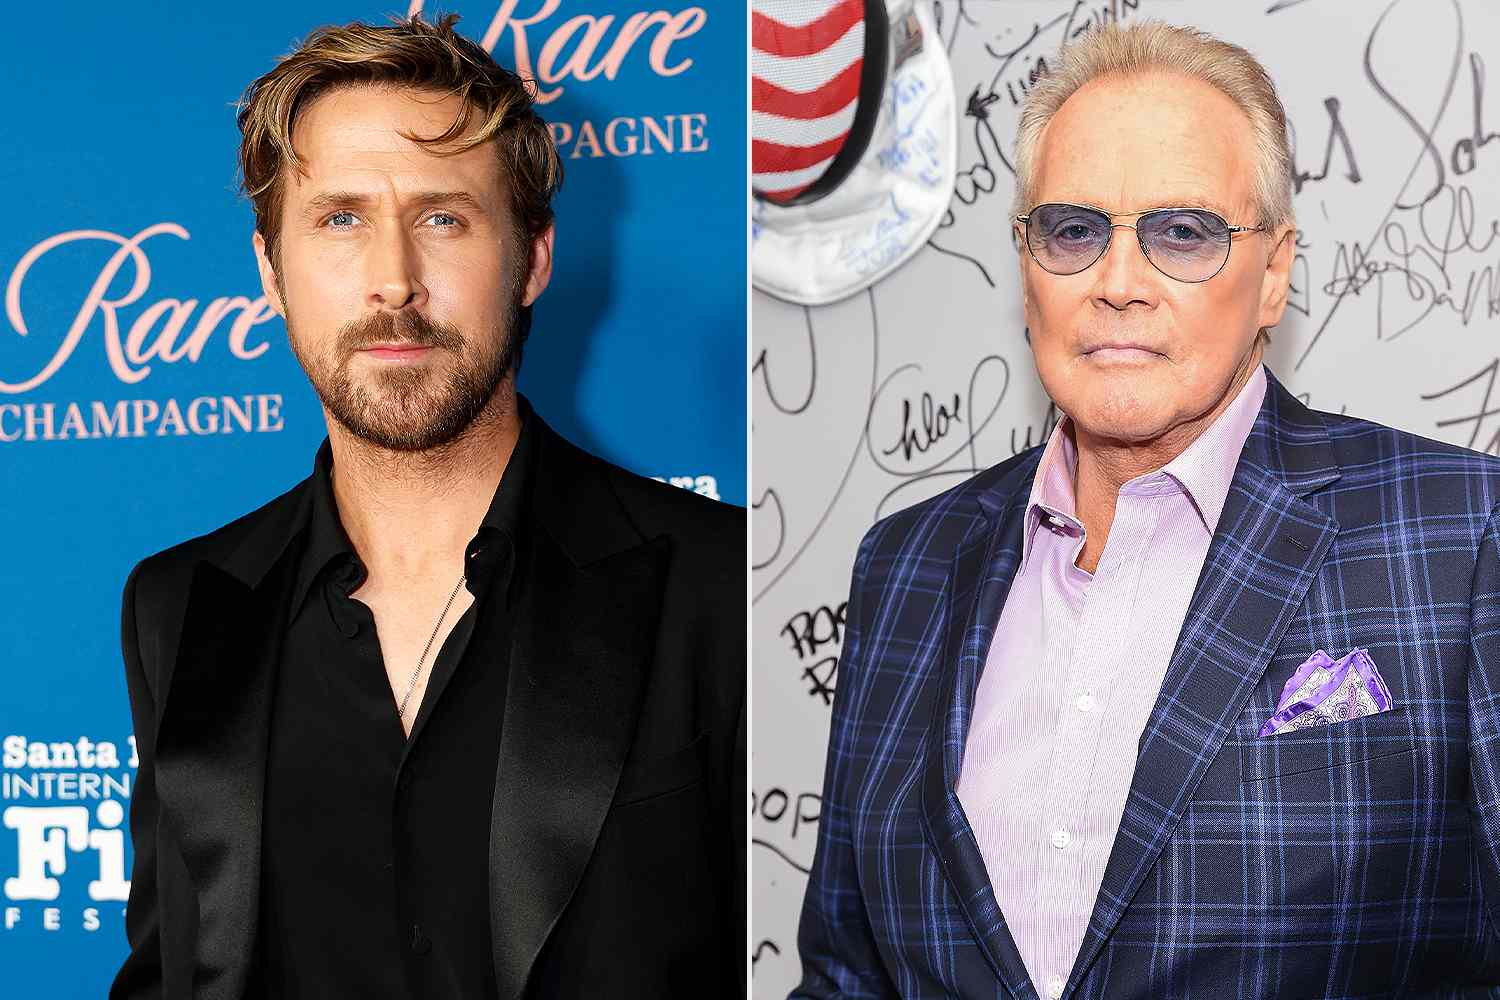 Lee Majors Became Friends with Ryan Gosling While Filming 'Fall Guy' Cameo: 'Really Good Vibes' (Exclusive)